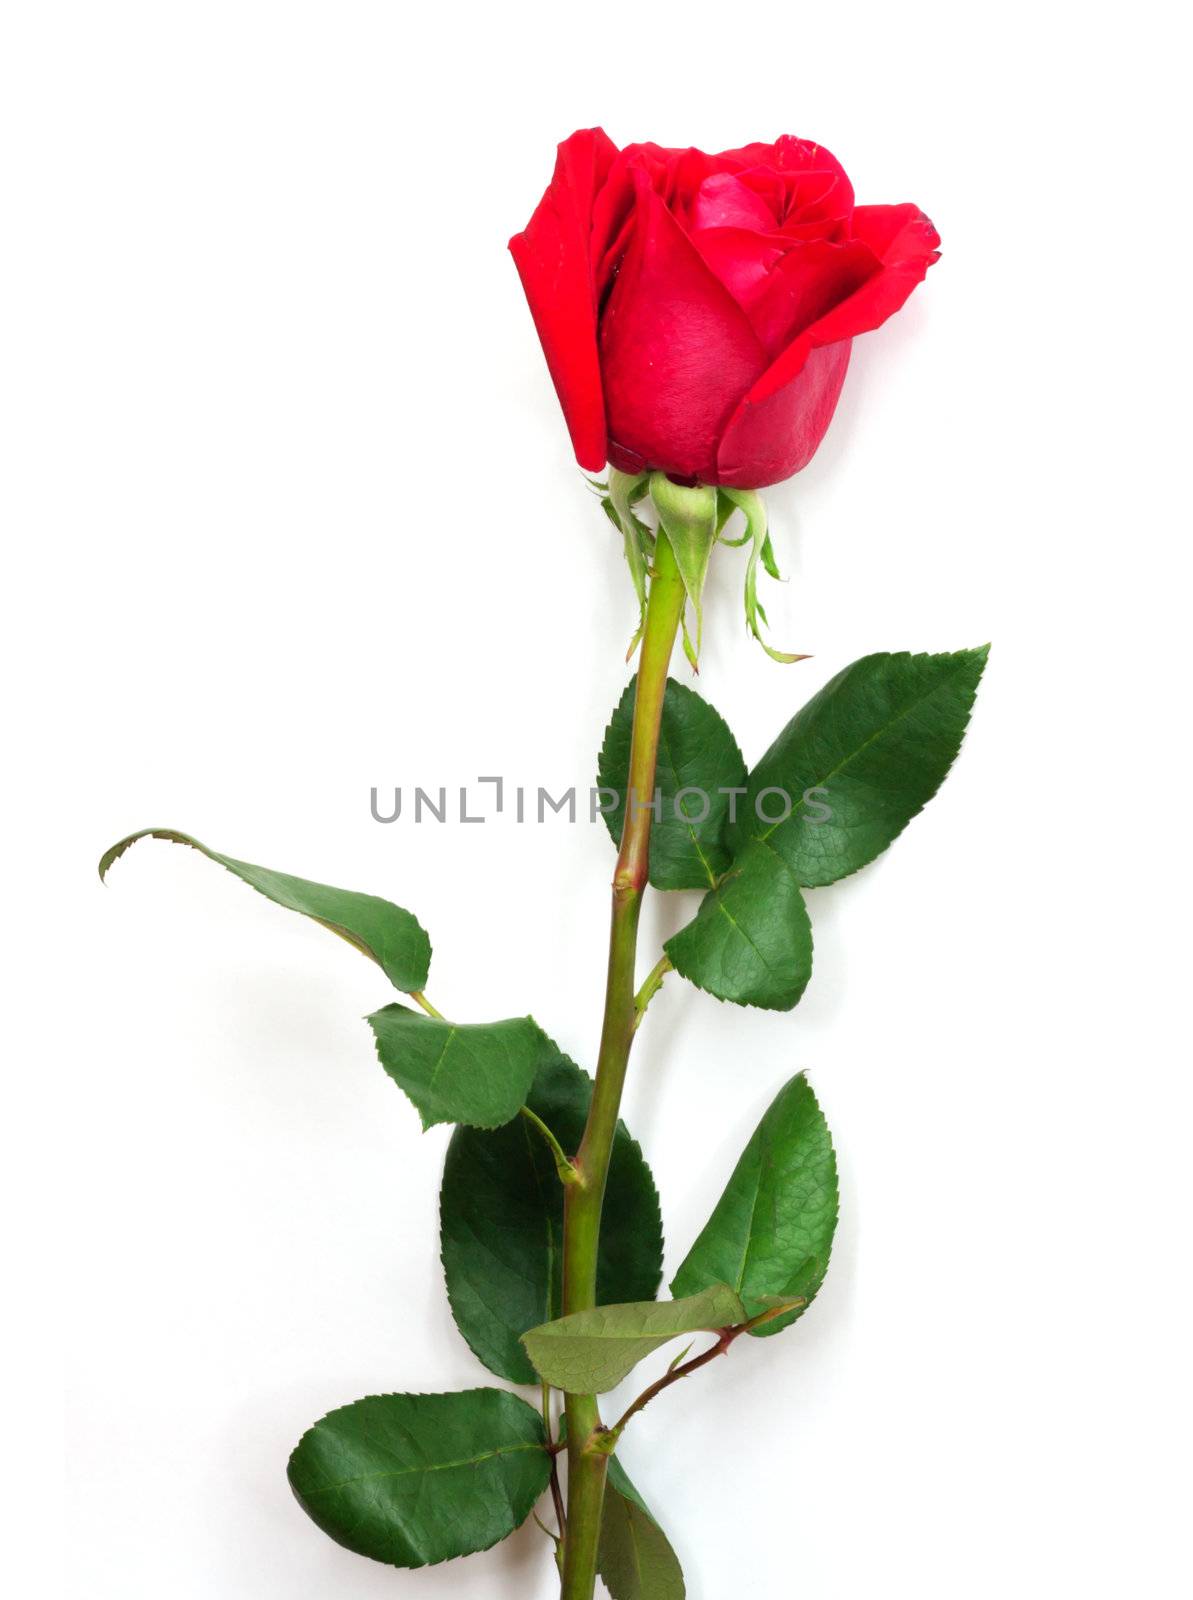 A Isolated red rose on white background  by schankz